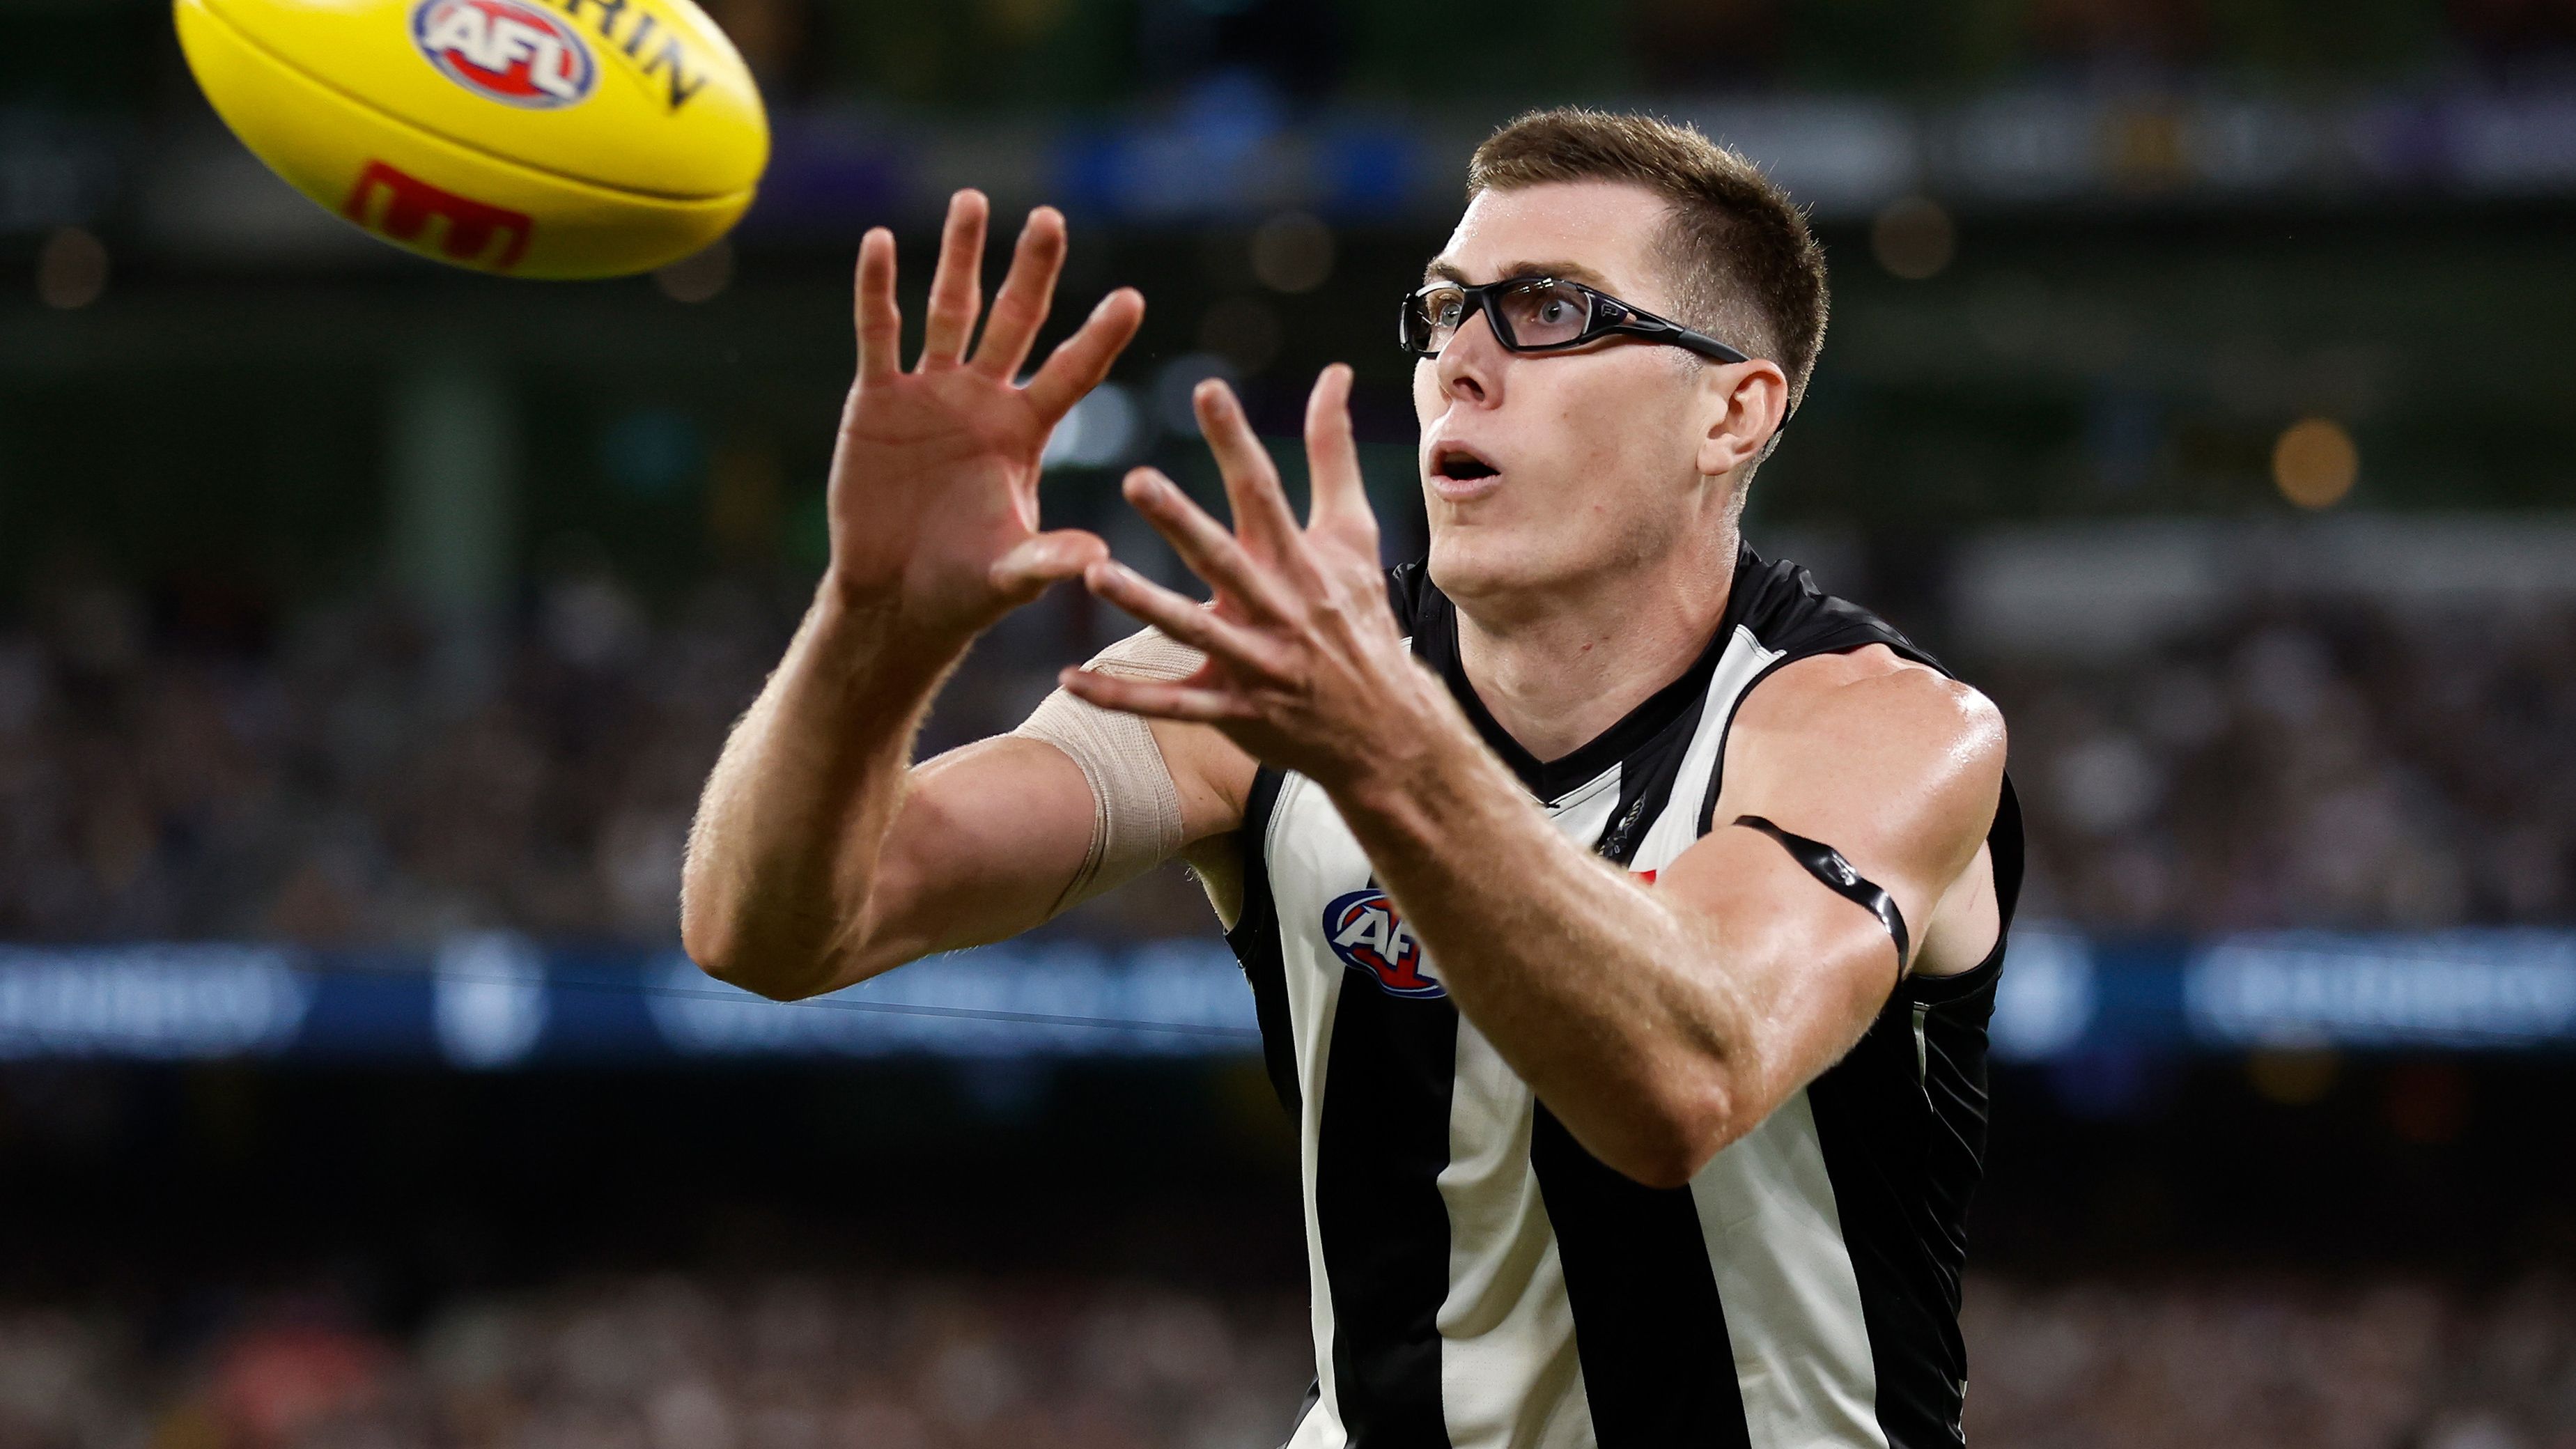 MELBOURNE, AUSTRALIA - MARCH 17: Mason Cox of the Magpies marks the ball during the 2023 AFL Round 01 match between the Geelong Cats and the Collingwood Magpies at the Melbourne Cricket Ground on March 17, 2023 in Melbourne, Australia. (Photo by Michael Willson/AFL Photos)